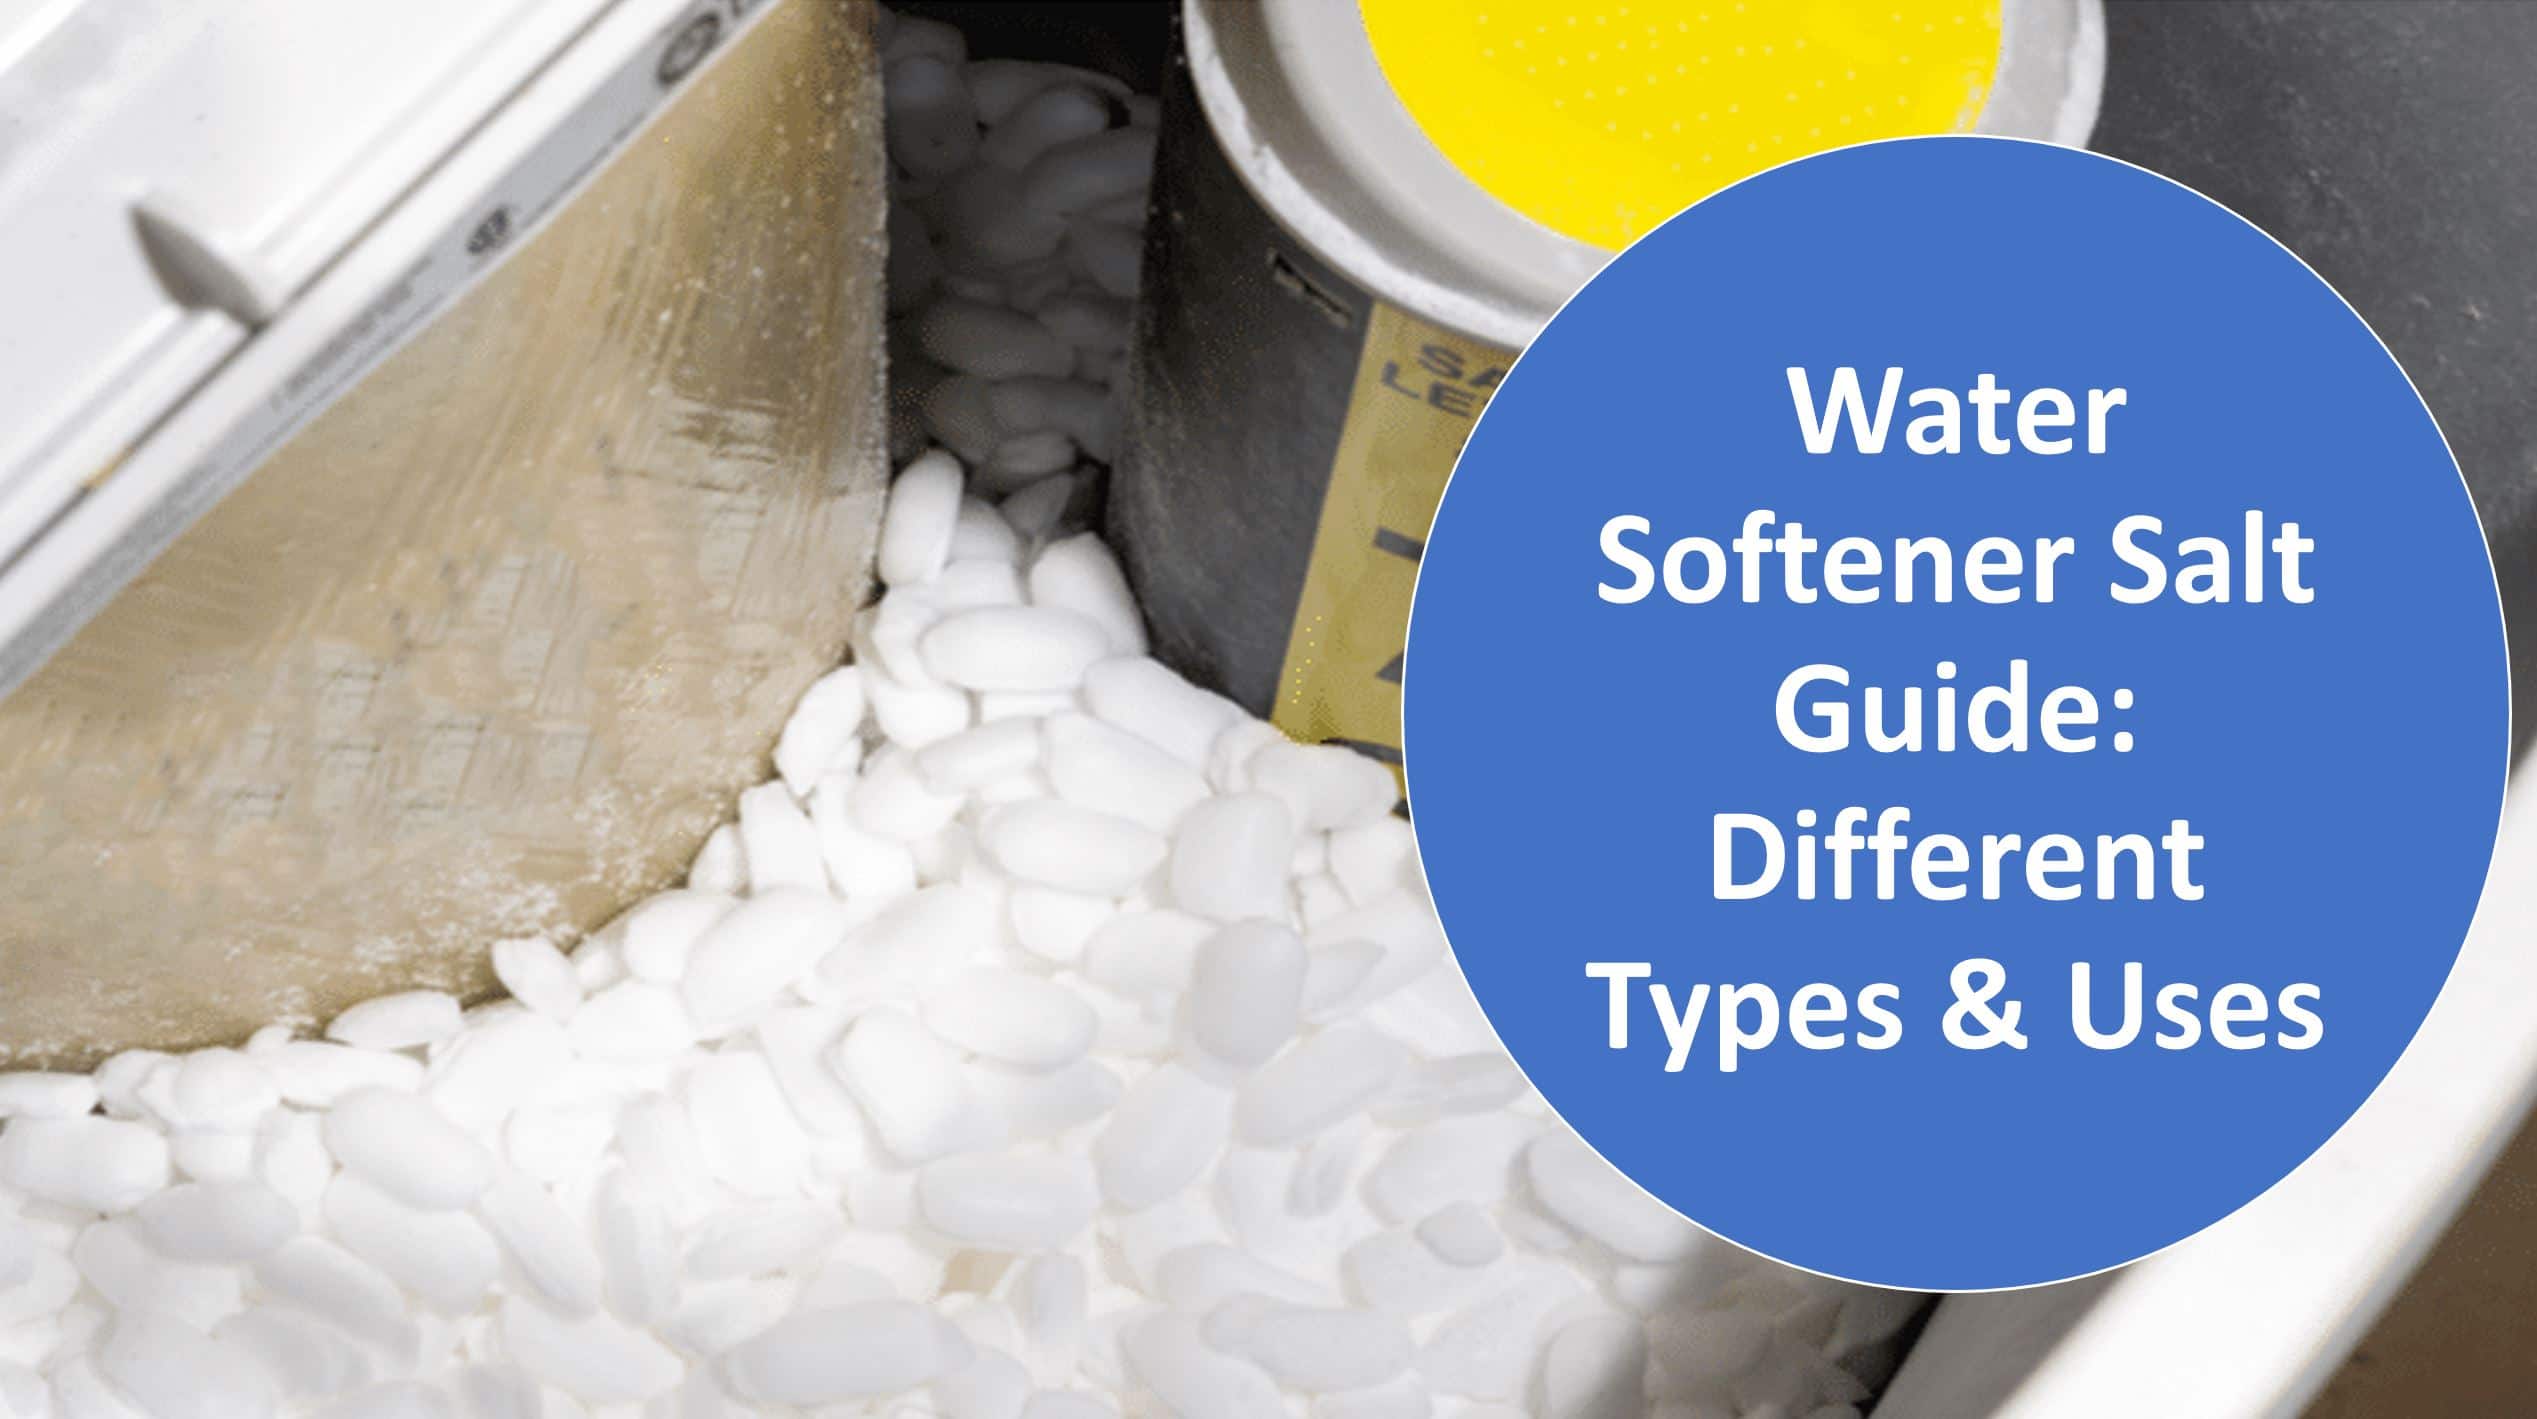 Is Water Softener Salt Edible or Poisonous?